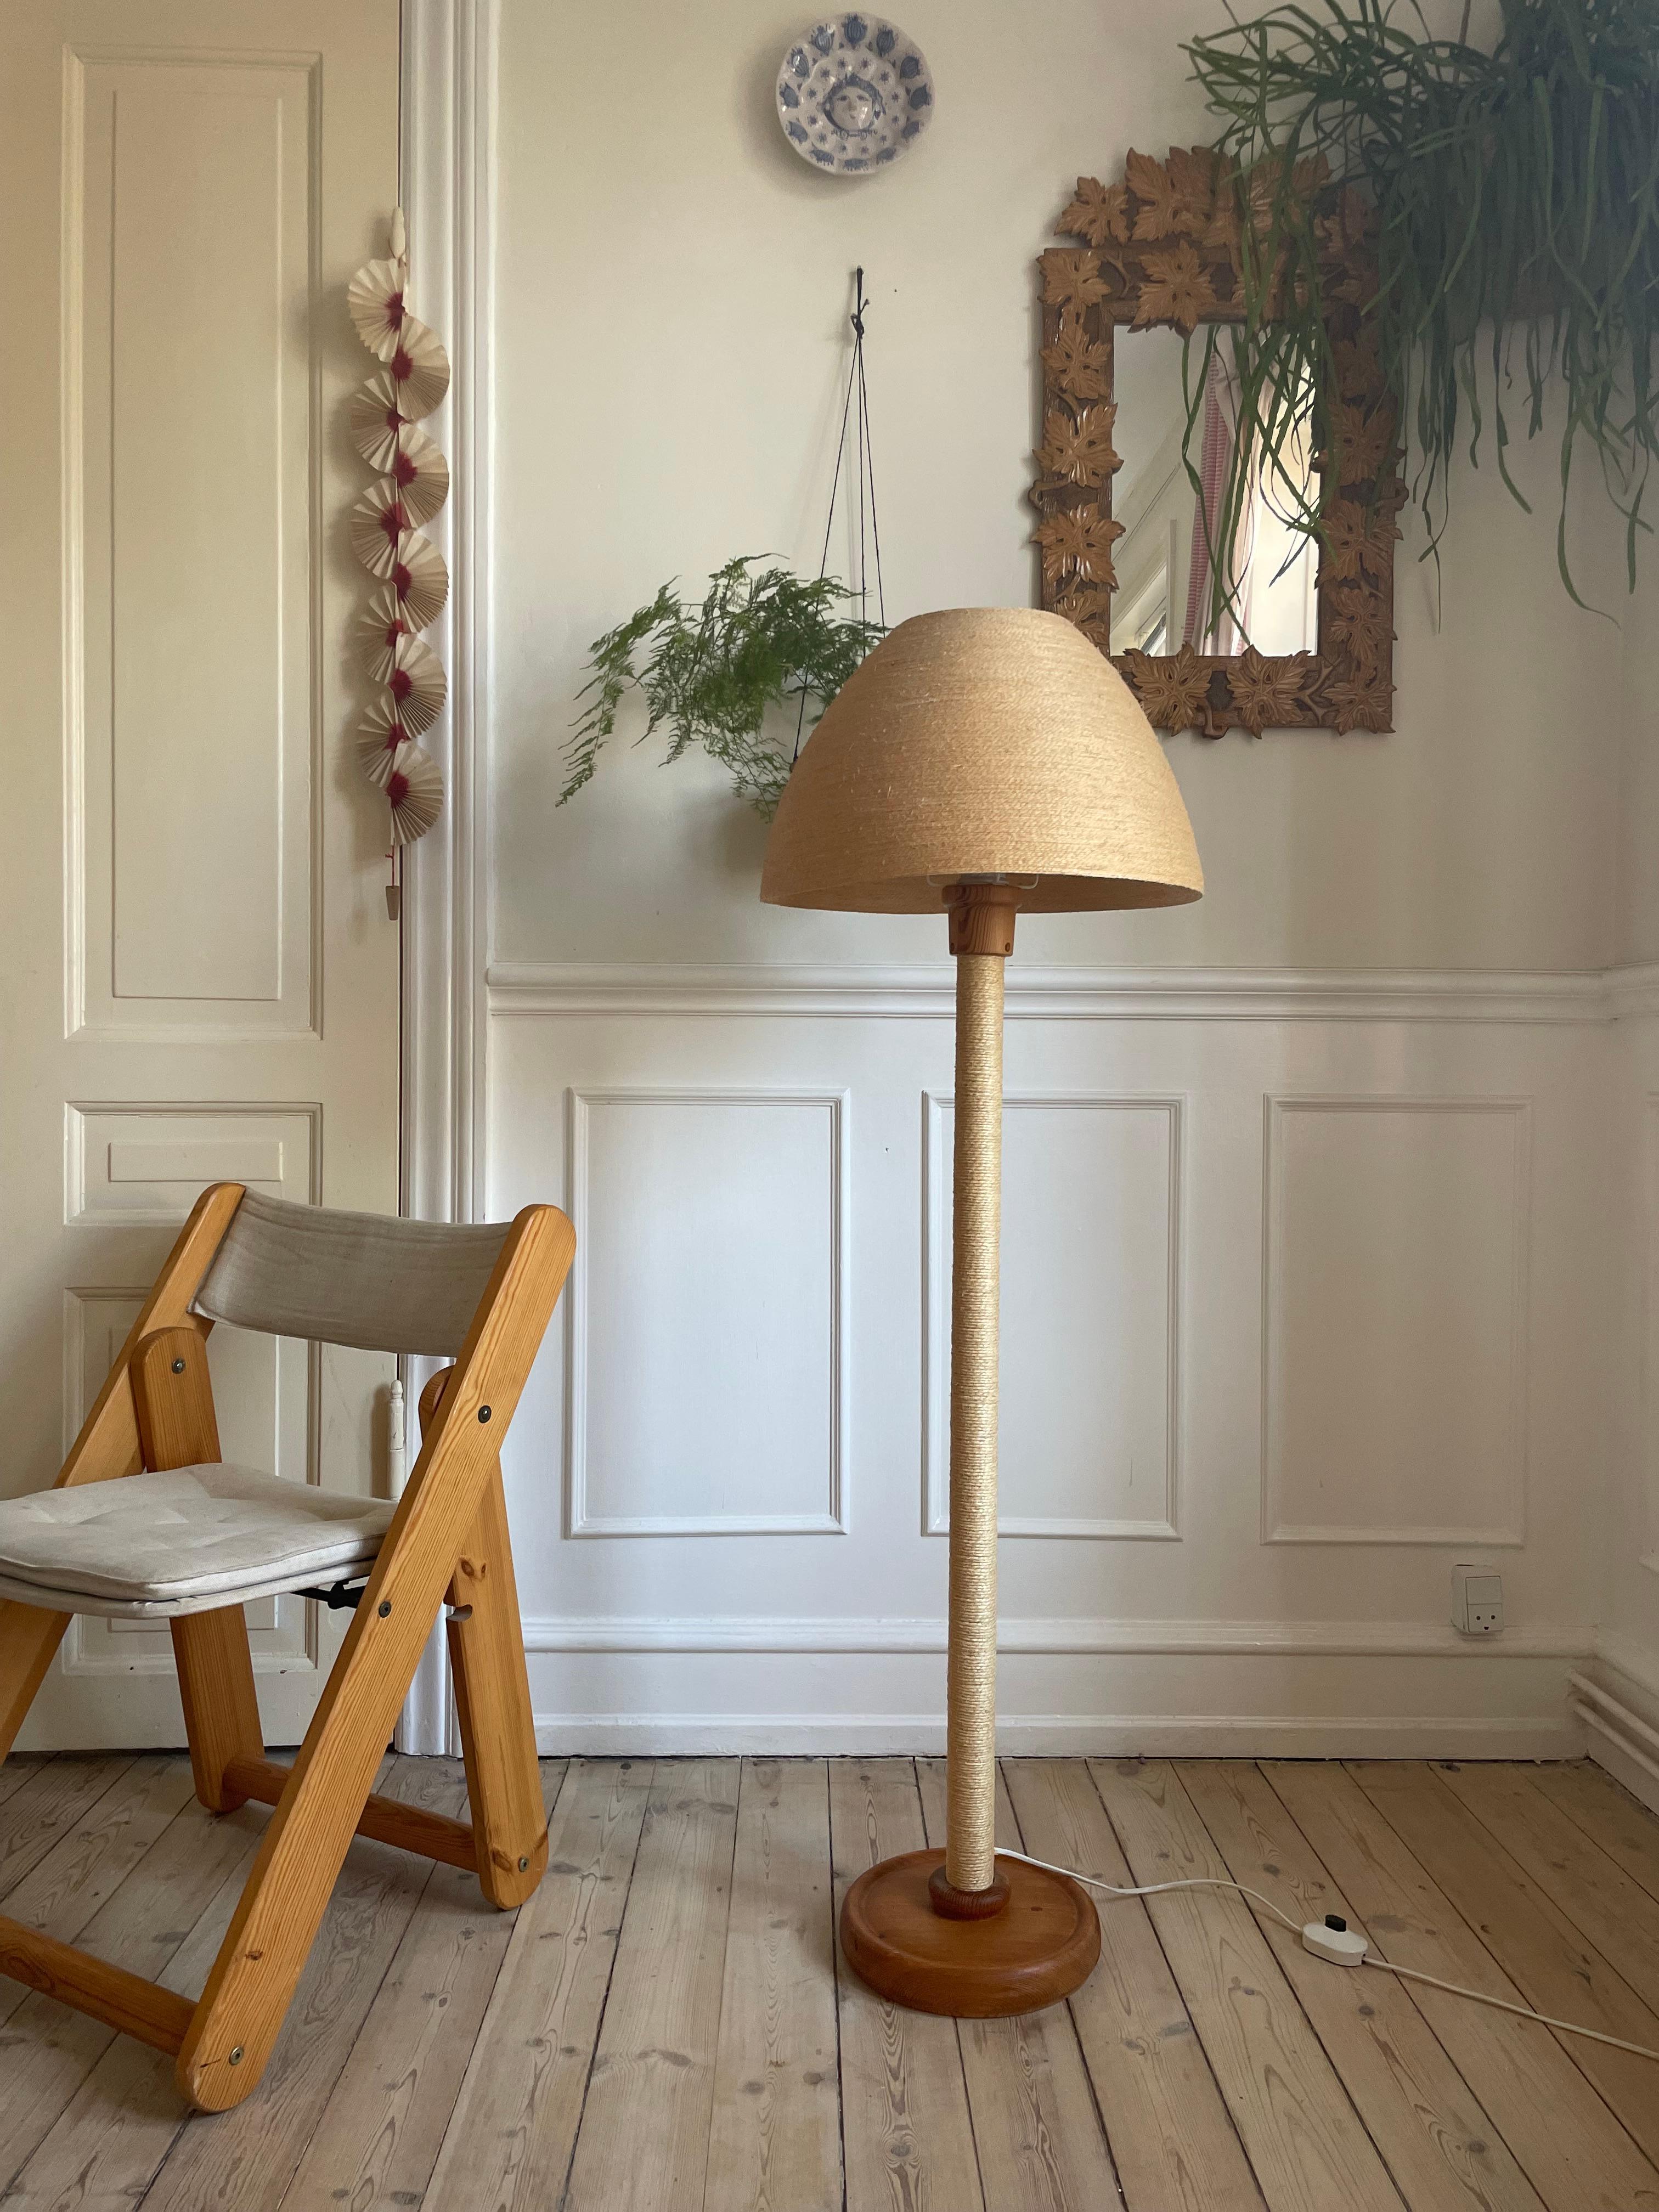 Very rare Hans-Agne Jakobsson (1919-2009) floor lamp from the 1960s. Wooden stem covered with neatly layered thin rope from base to top. Original lamp shade of matching layered thin rope molded in a soft shape fitting perfectly over the shade